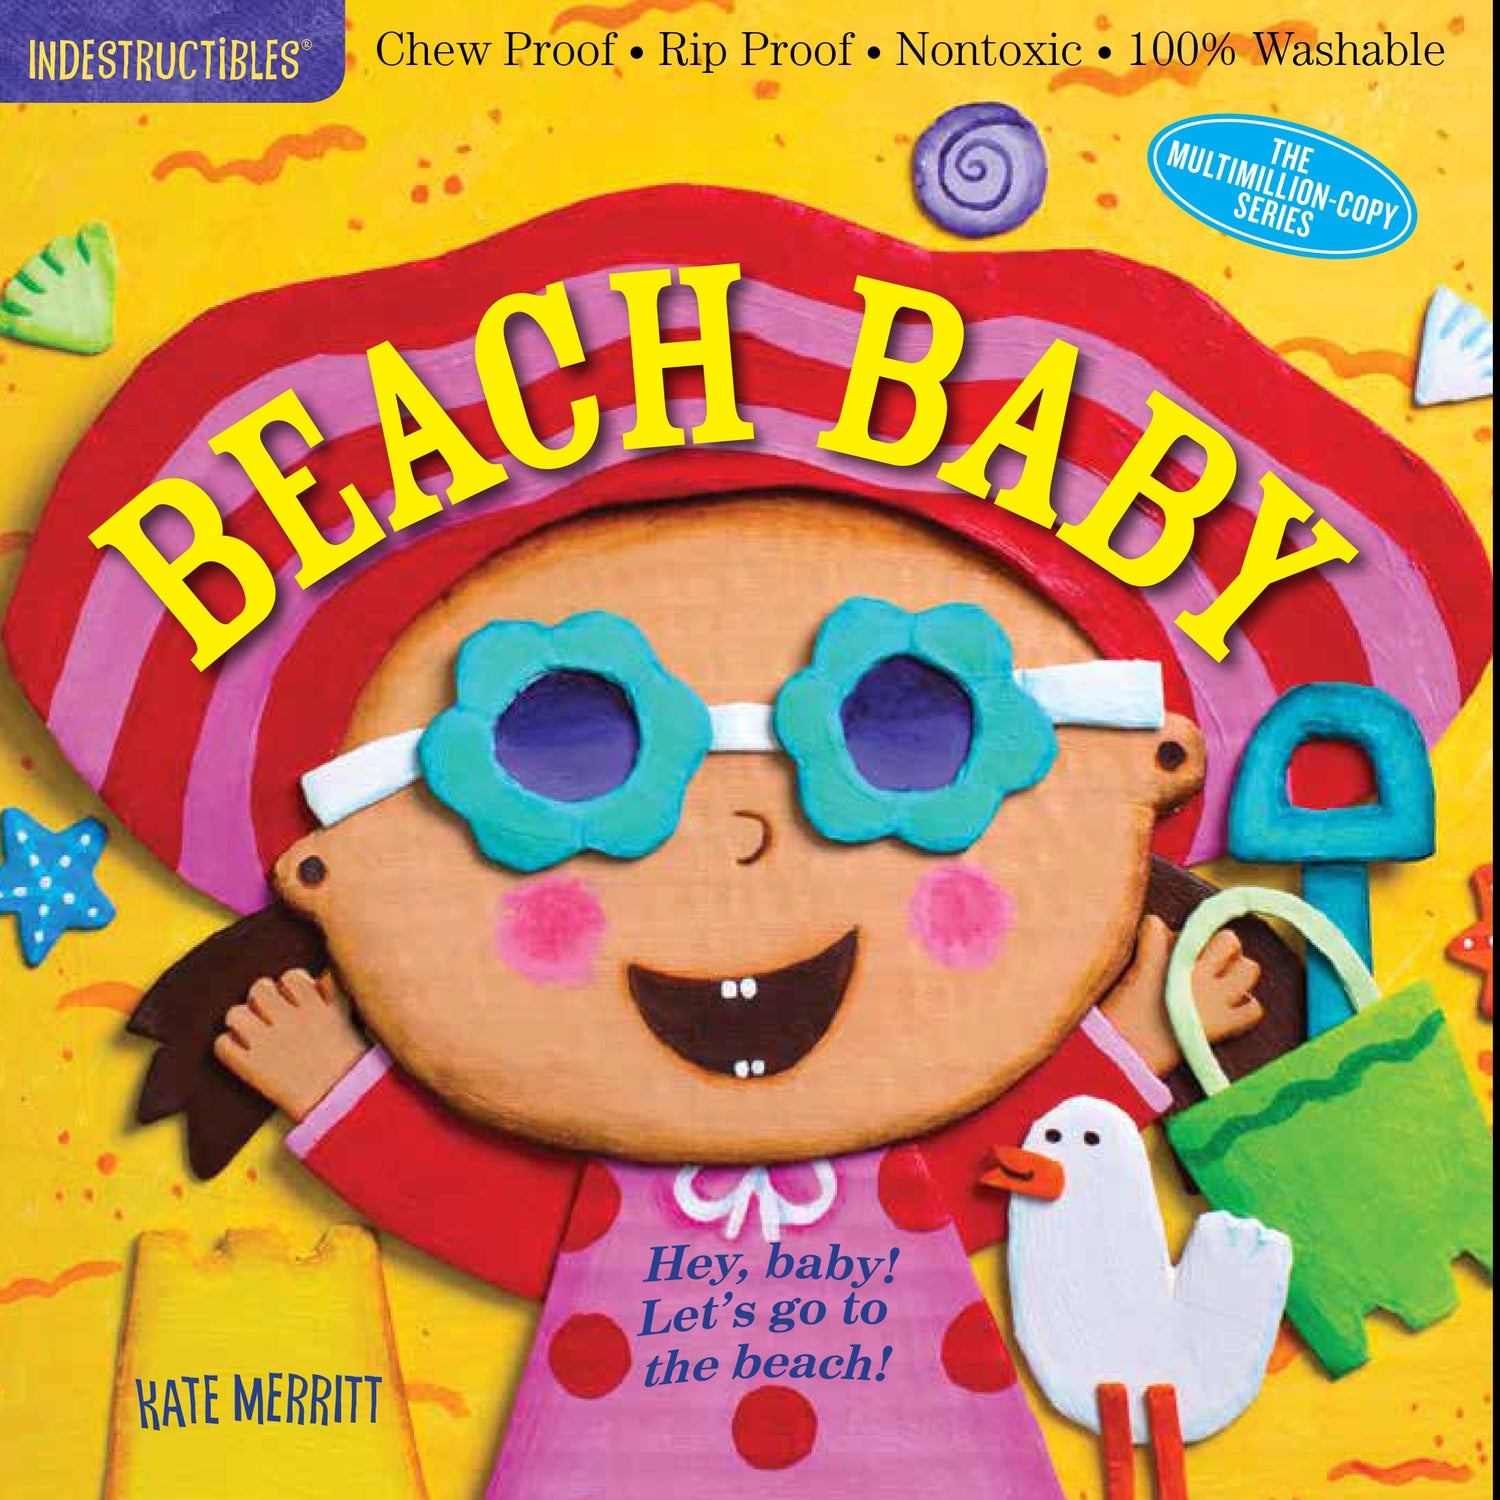 Indestructibles: Beach Baby: Chew Proof · Rip Proof · Nontoxic · 100% Washable (Book for Babies, Newborn Books, Safe to Chew)